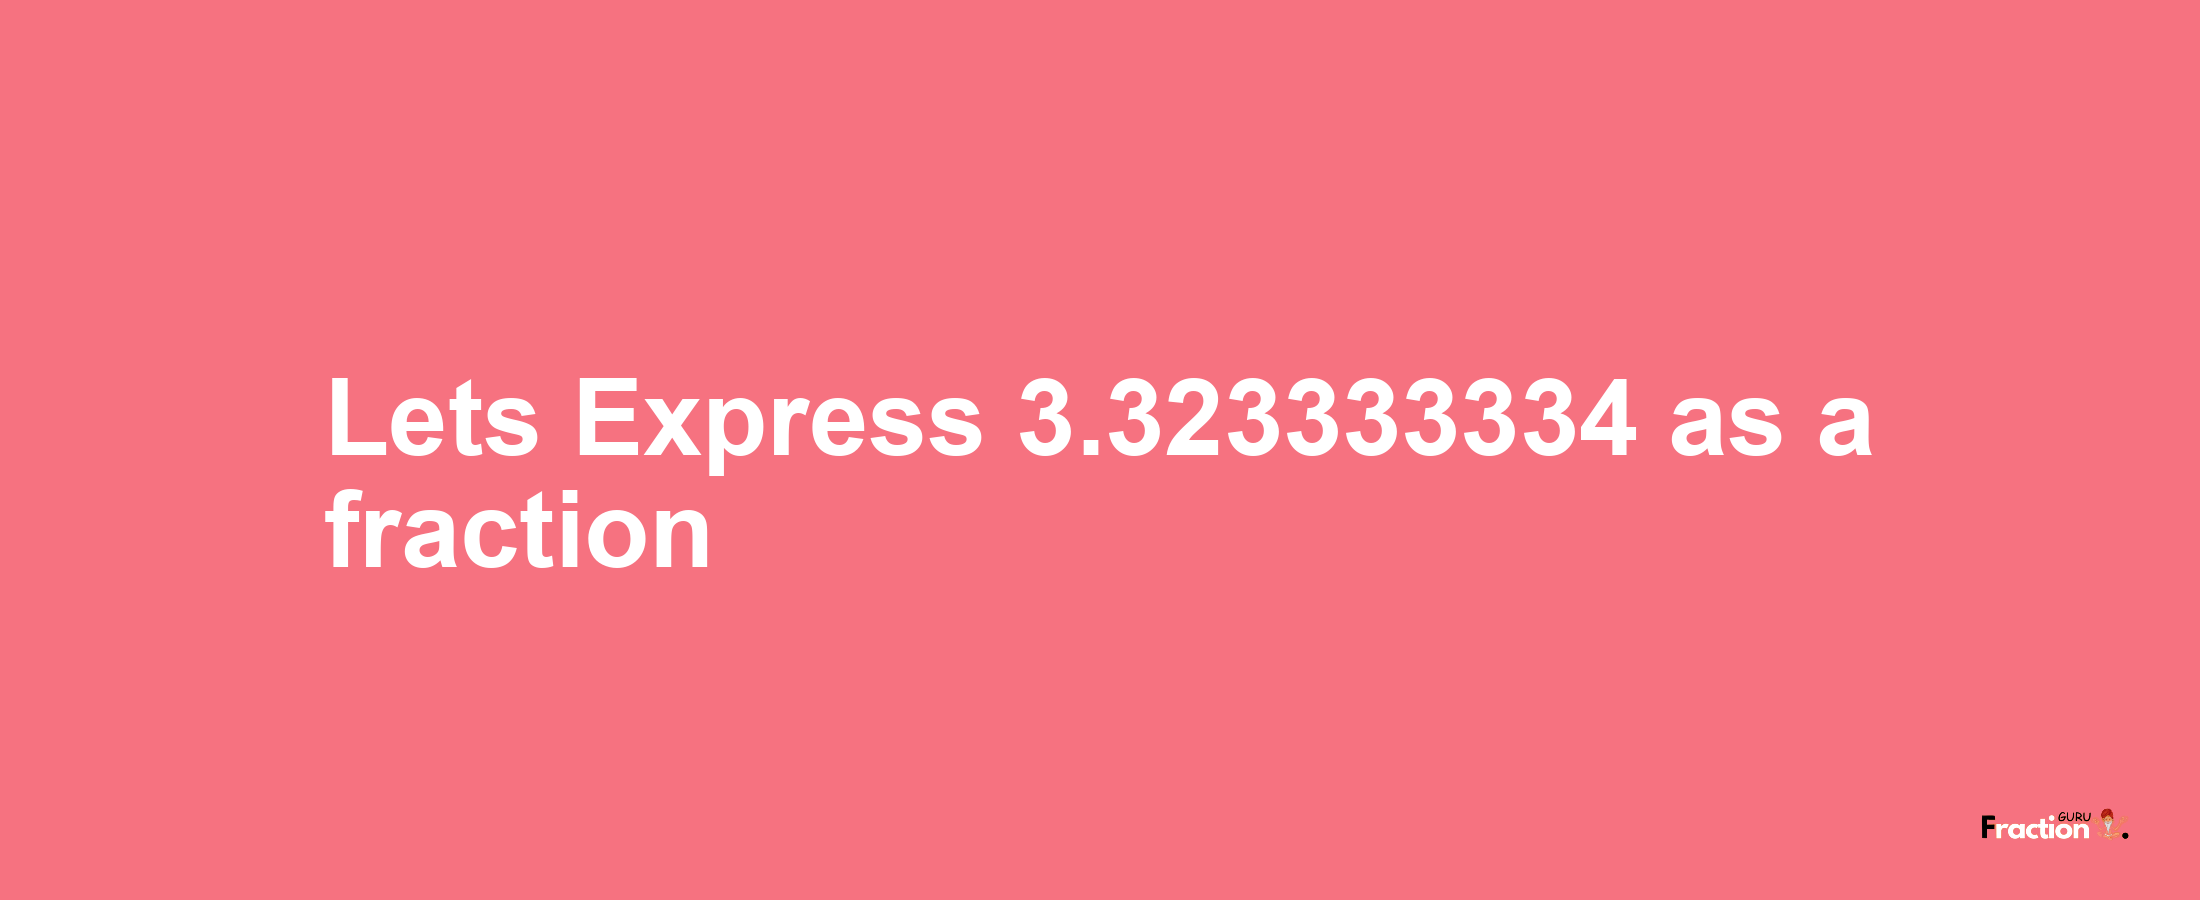 Lets Express 3.323333334 as afraction